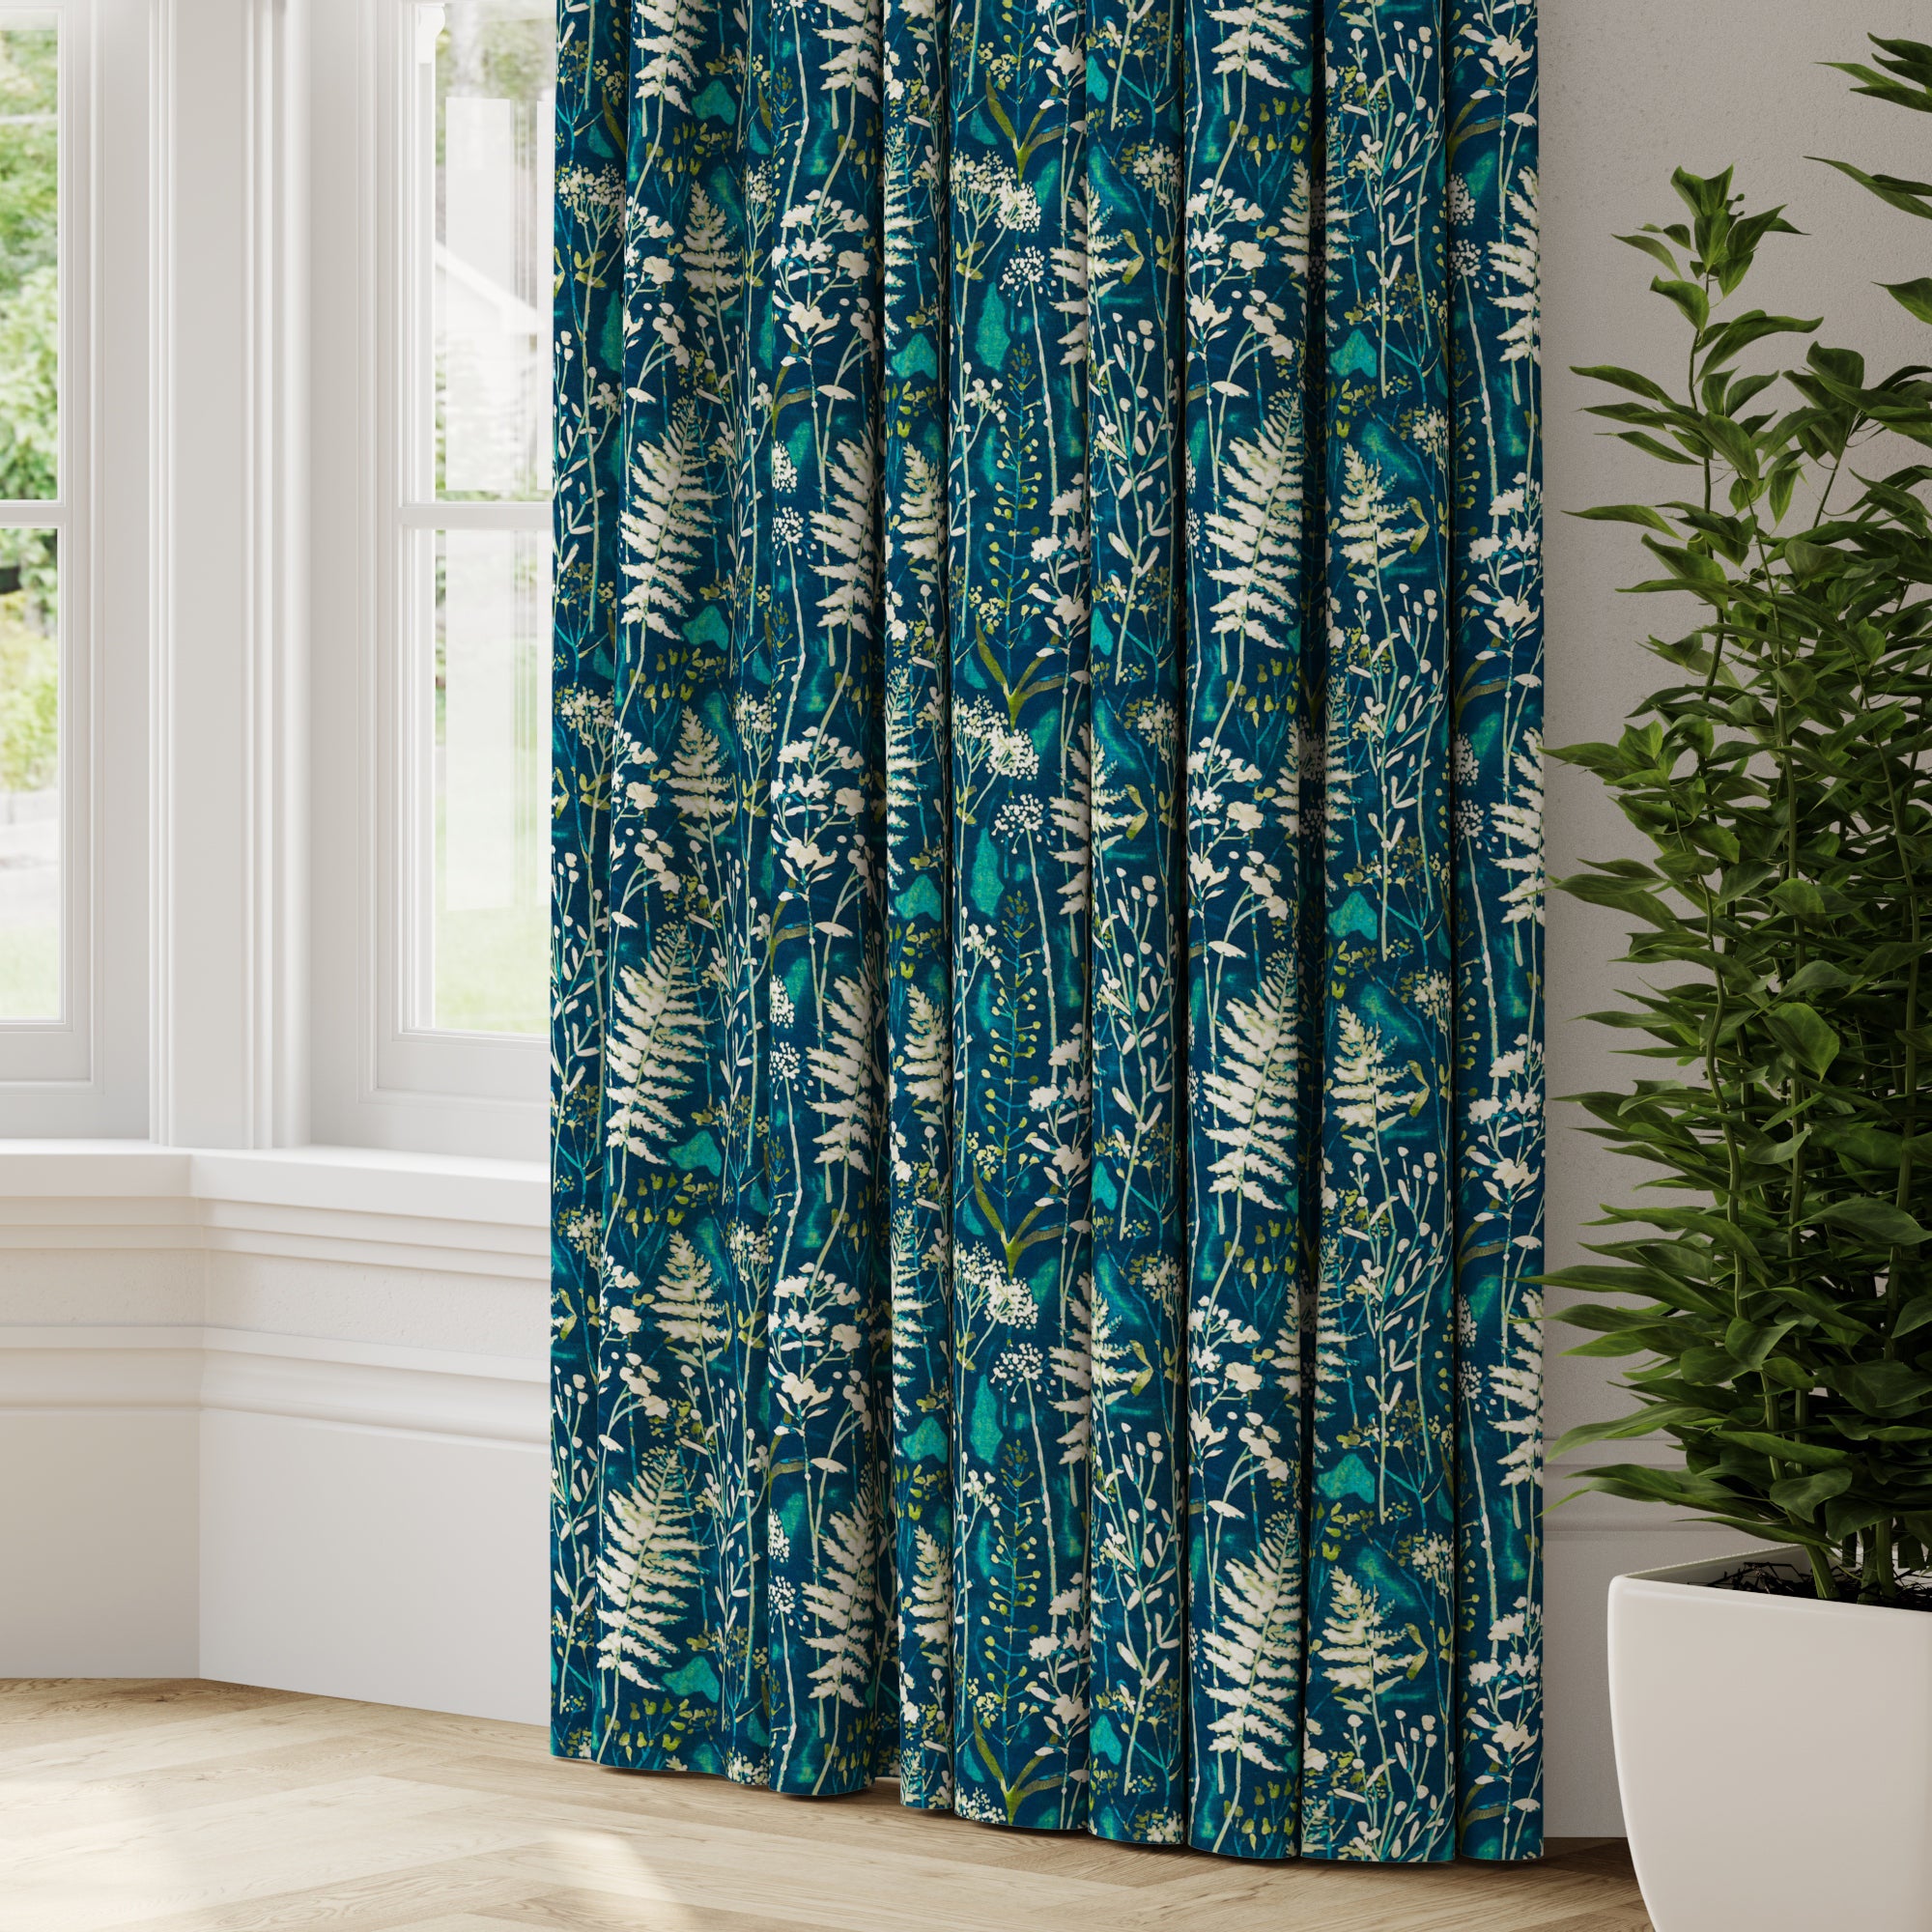 Netley Made to Measure Curtains